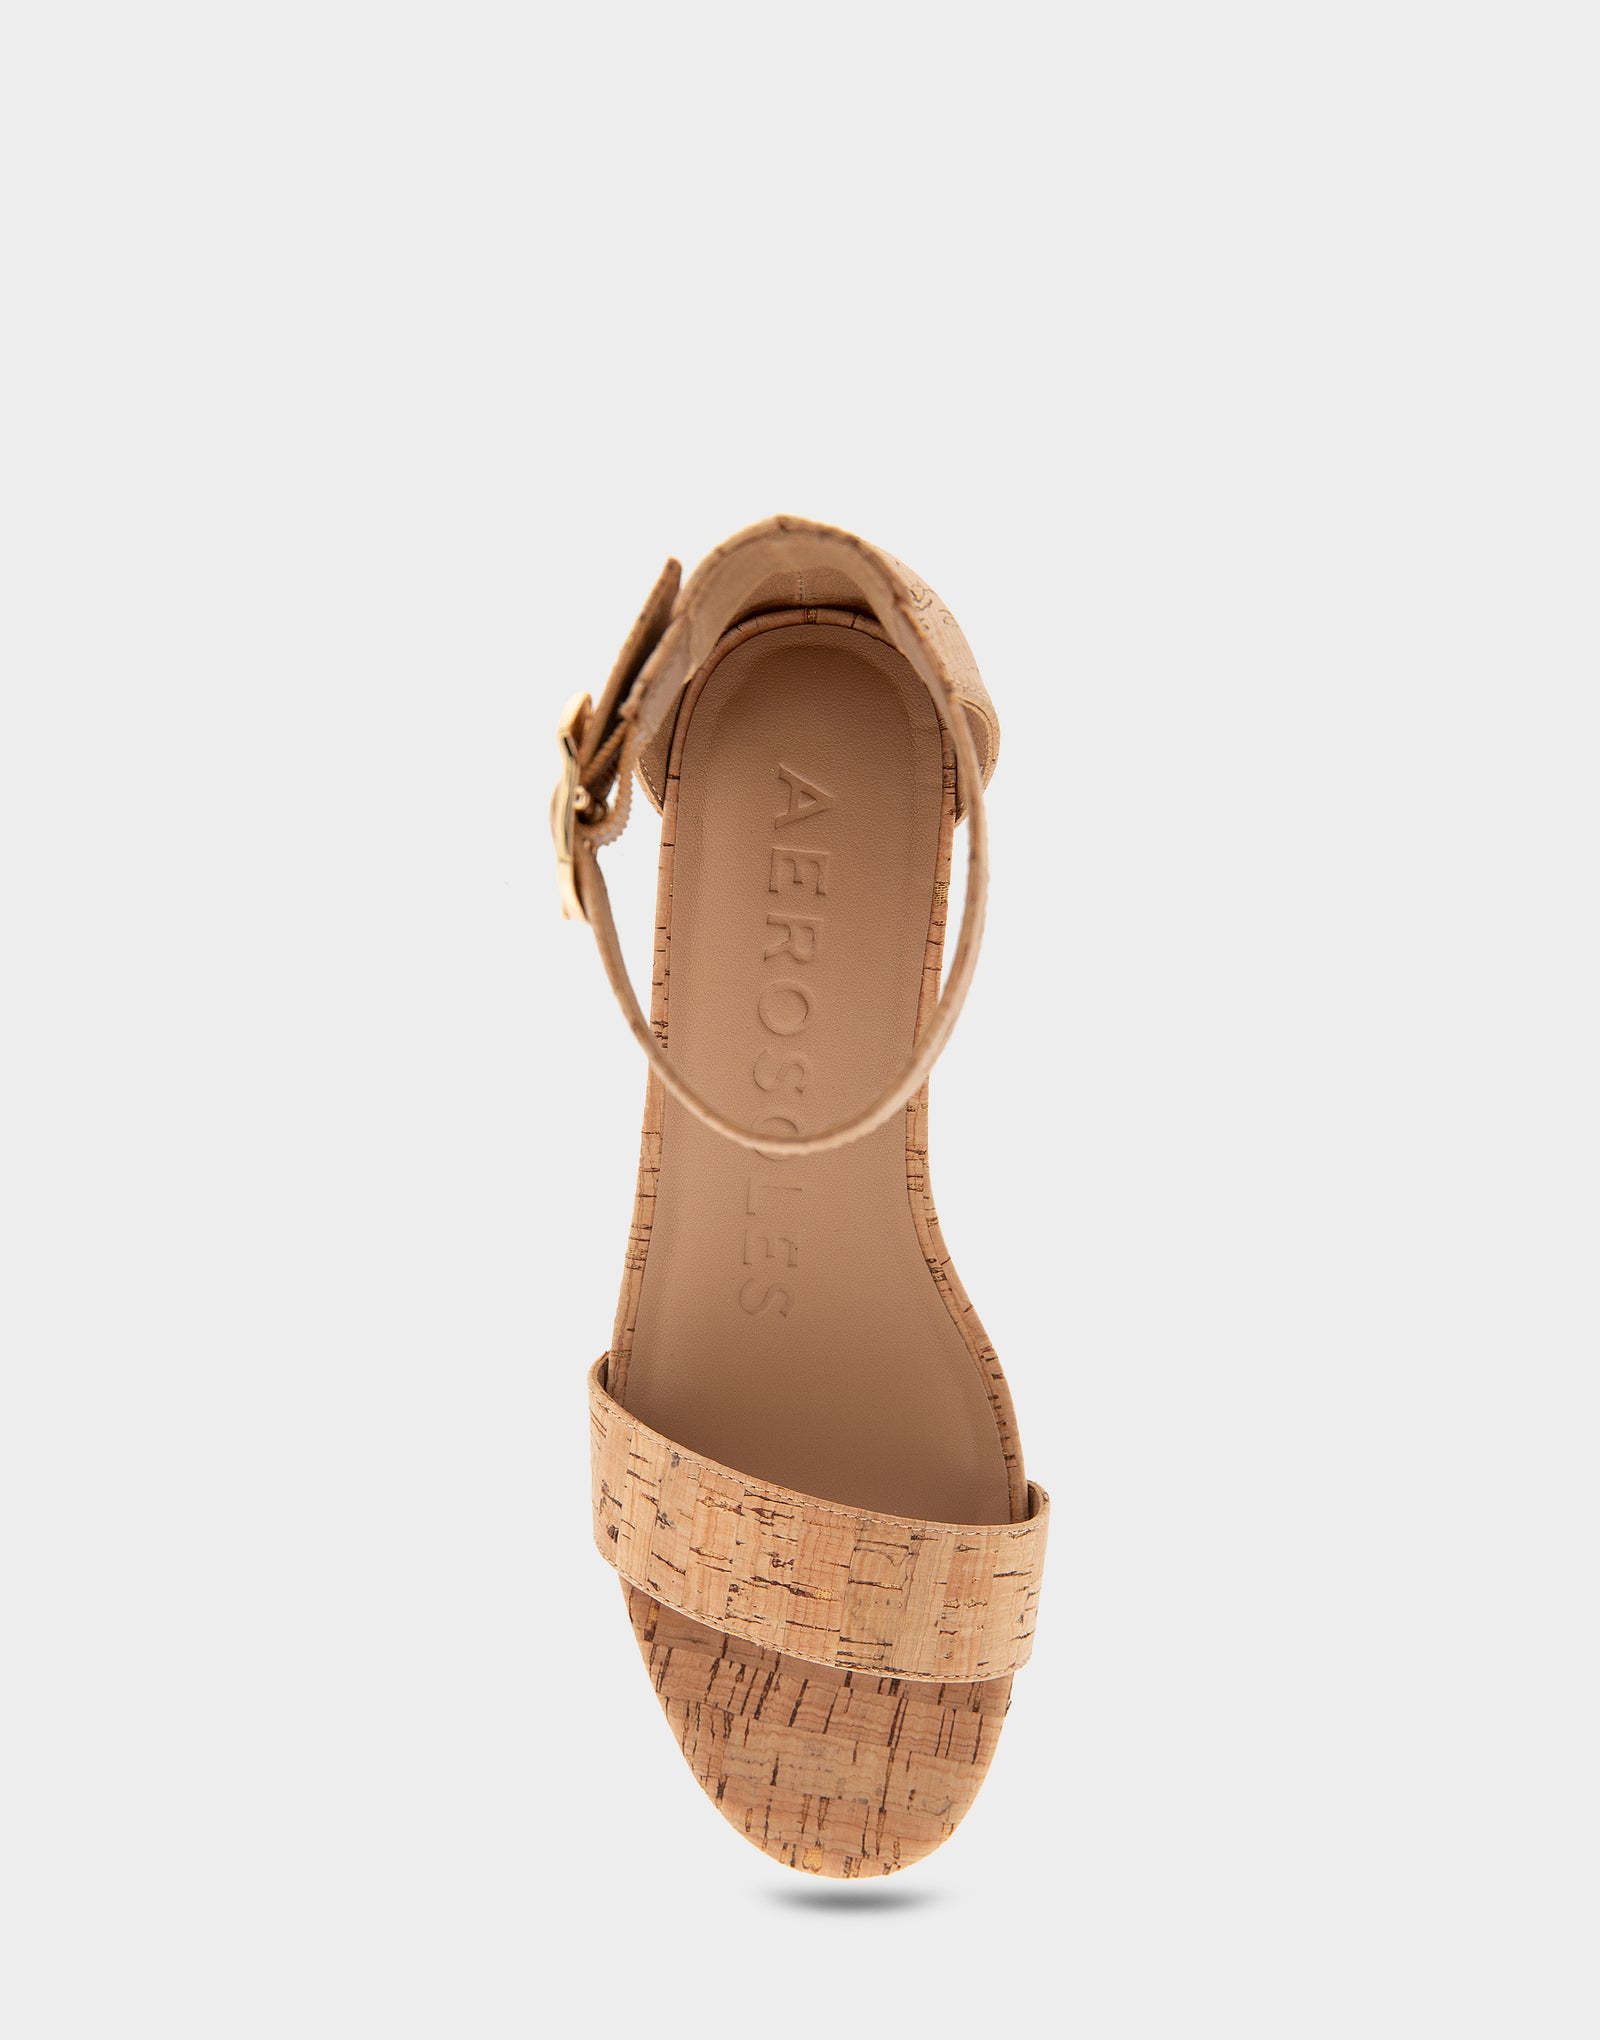 Women's Ankle Strap Mid Wedge Sandal in Cork Faux Leather